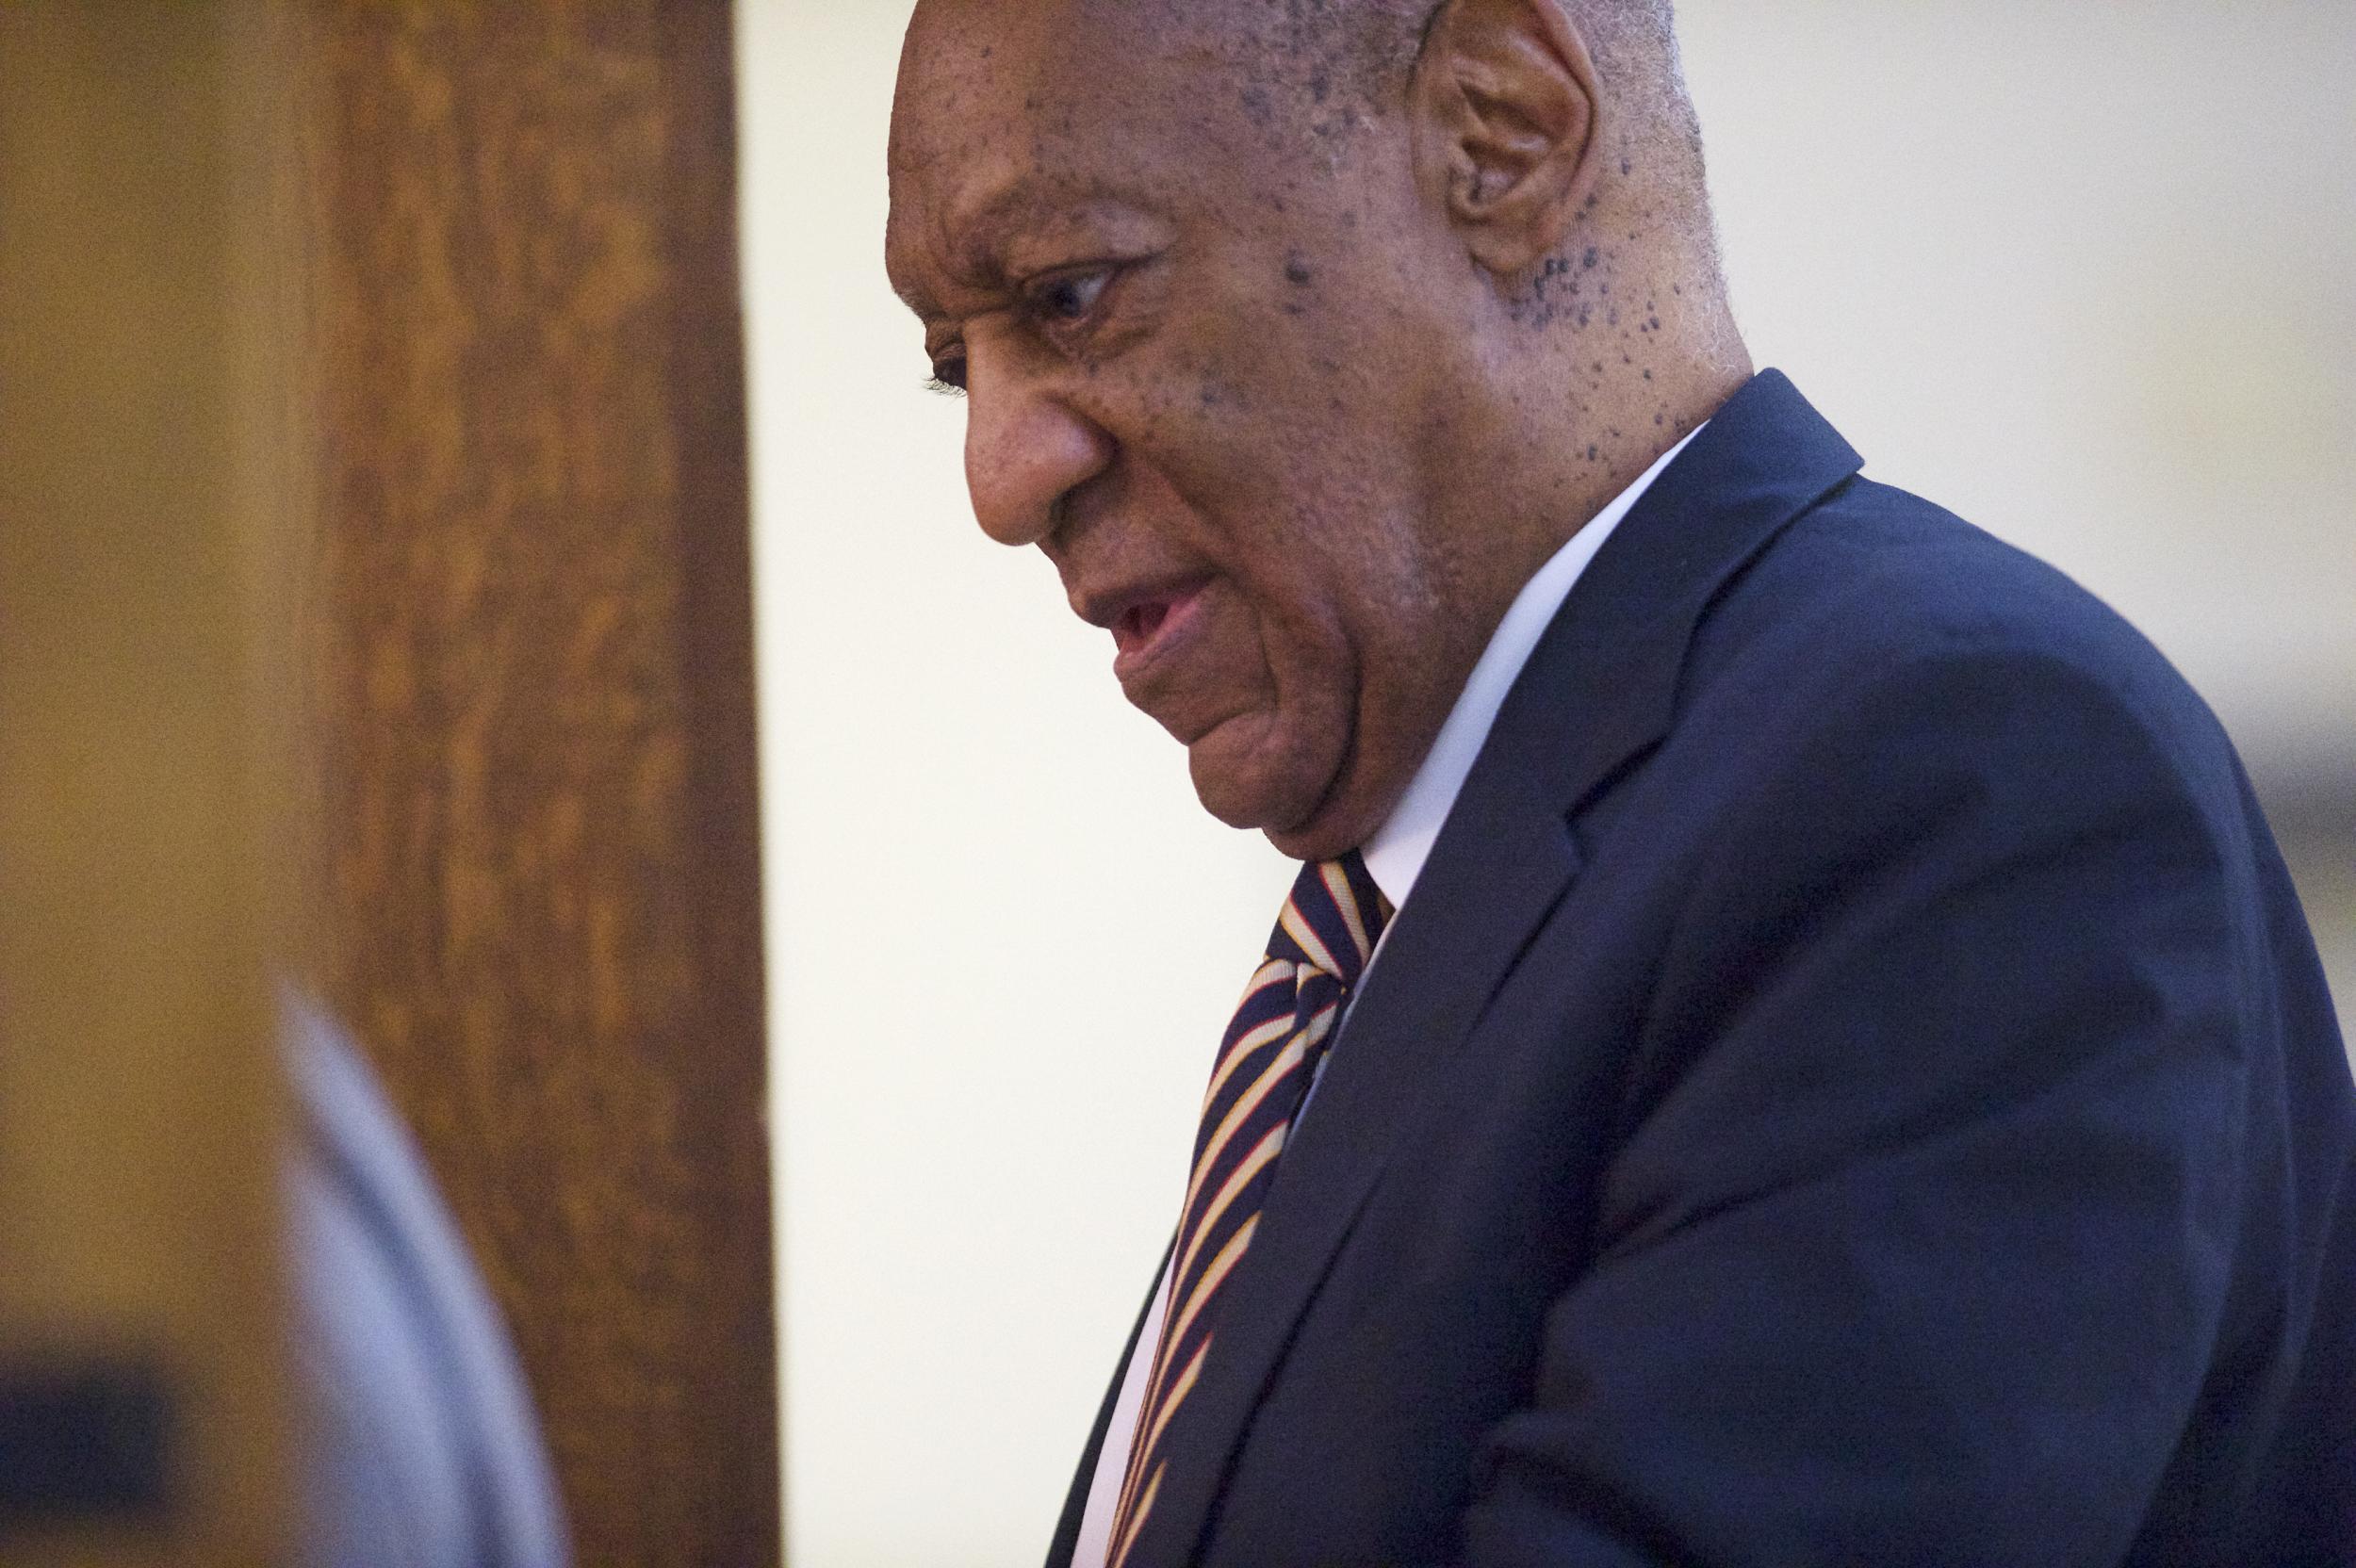 Bill Cosby enters the courtroom on the third day of jury deliberations in his sexual assault trial at the Montgomery County Courthouse